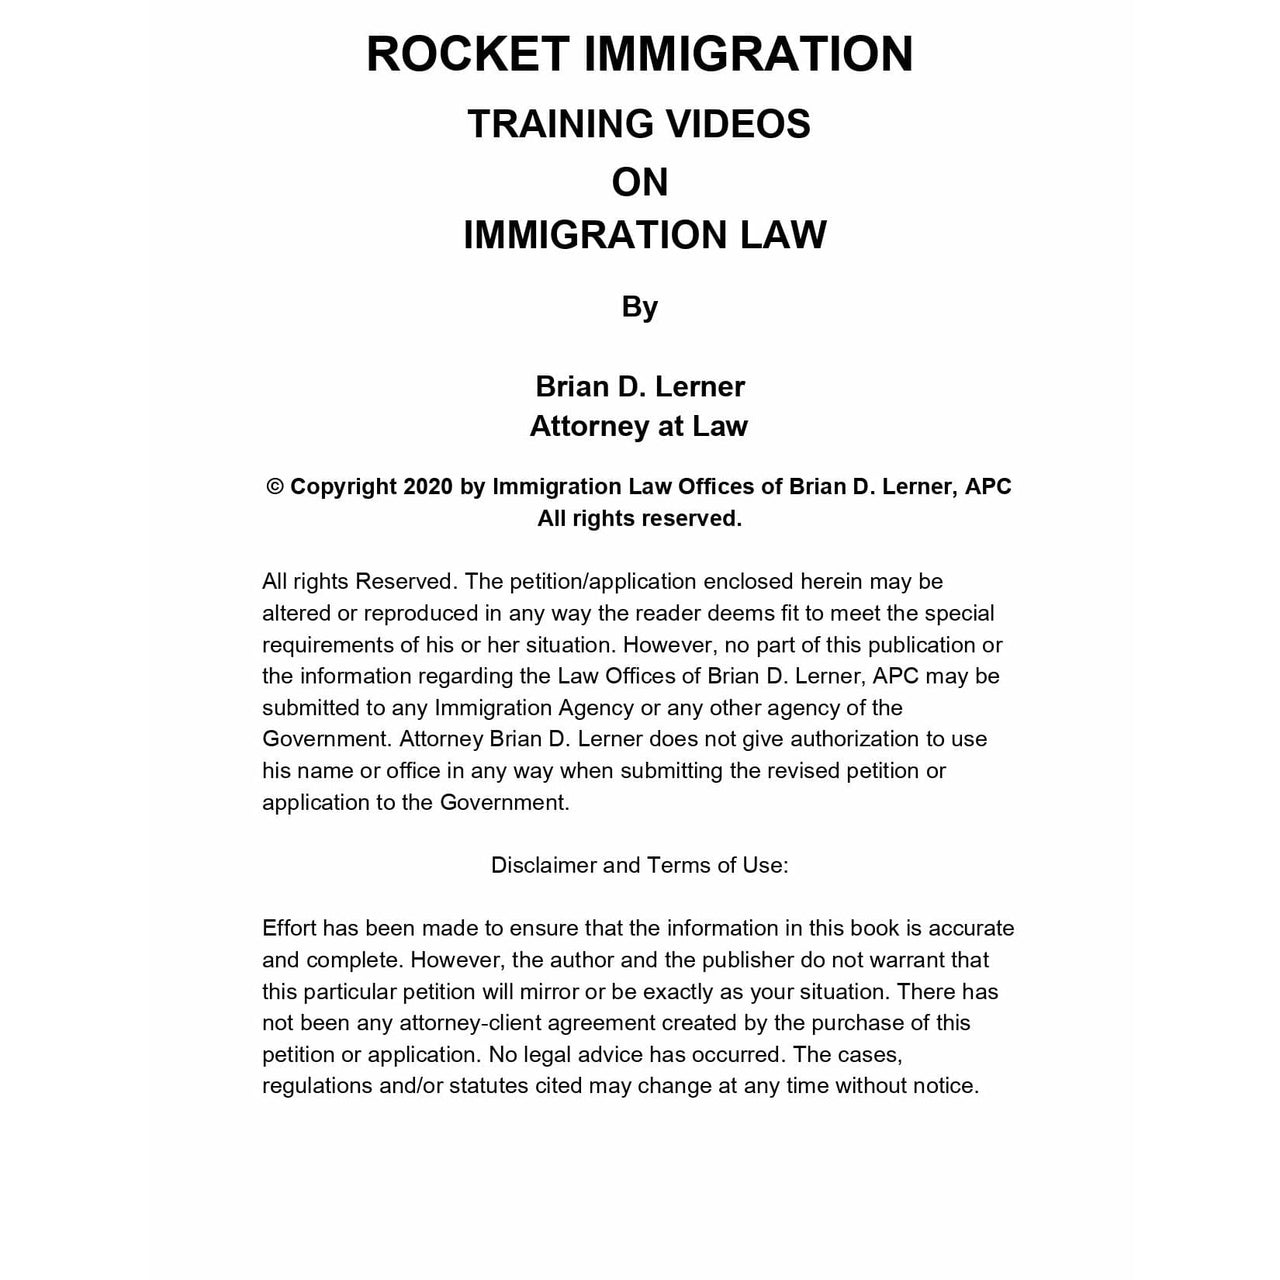 H-2B Temporary Work Visa Training Course Access Packet - Rocket Immigration Petitions